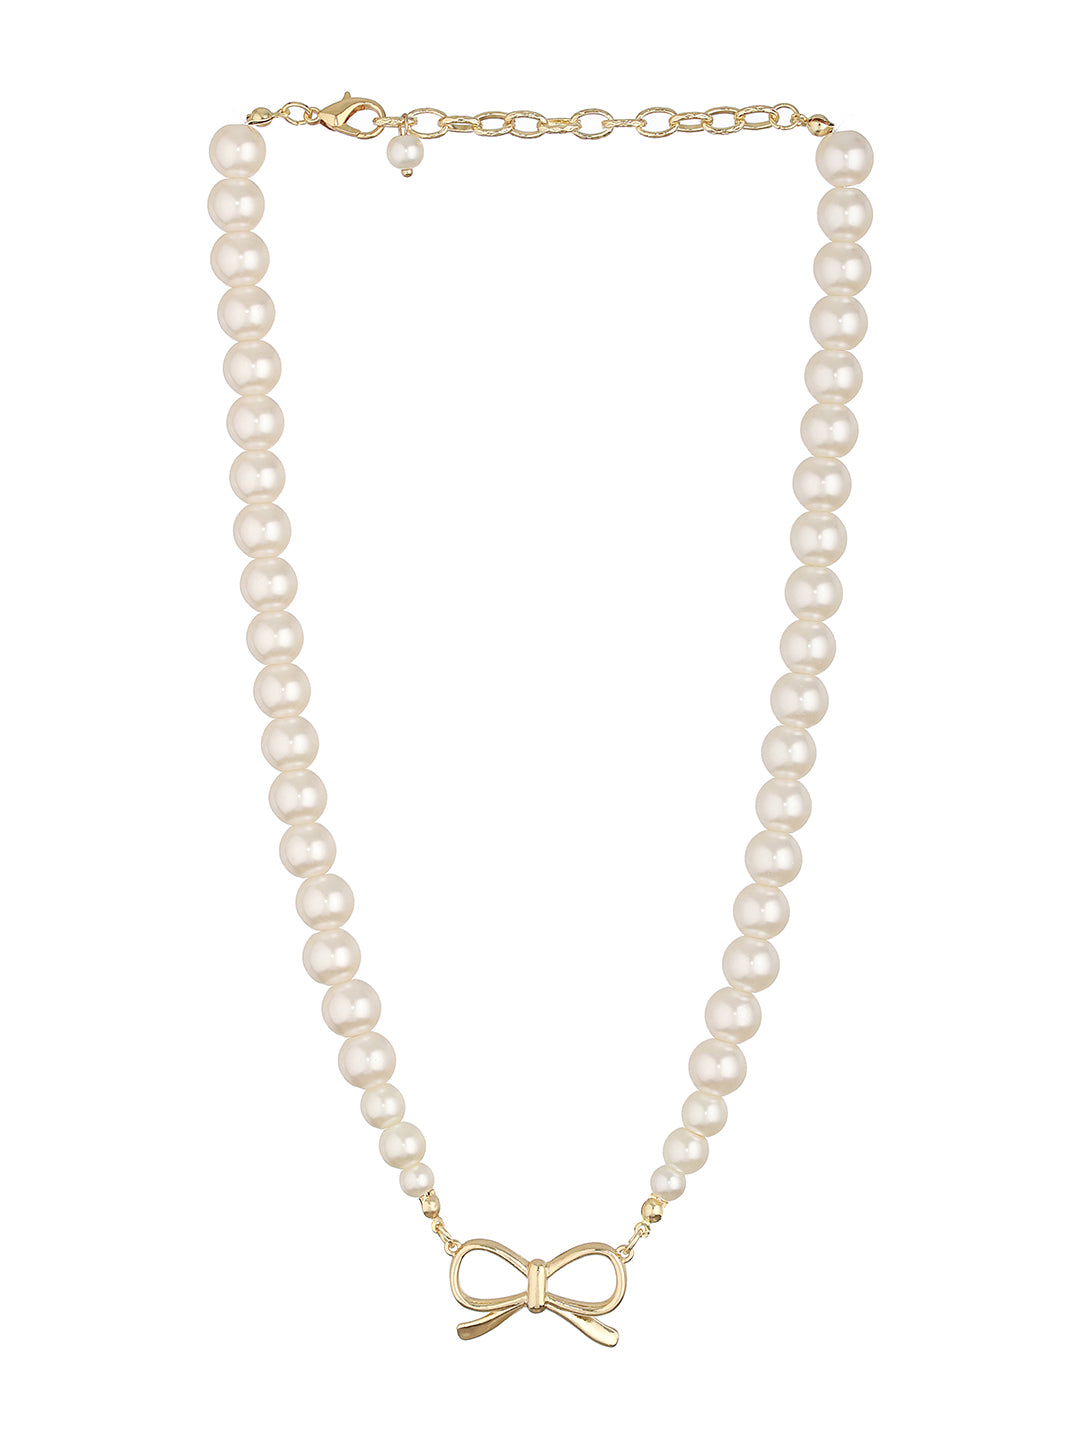 Prita by Priyaasi Pretty Bow Pearl Gold-Plated Necklace